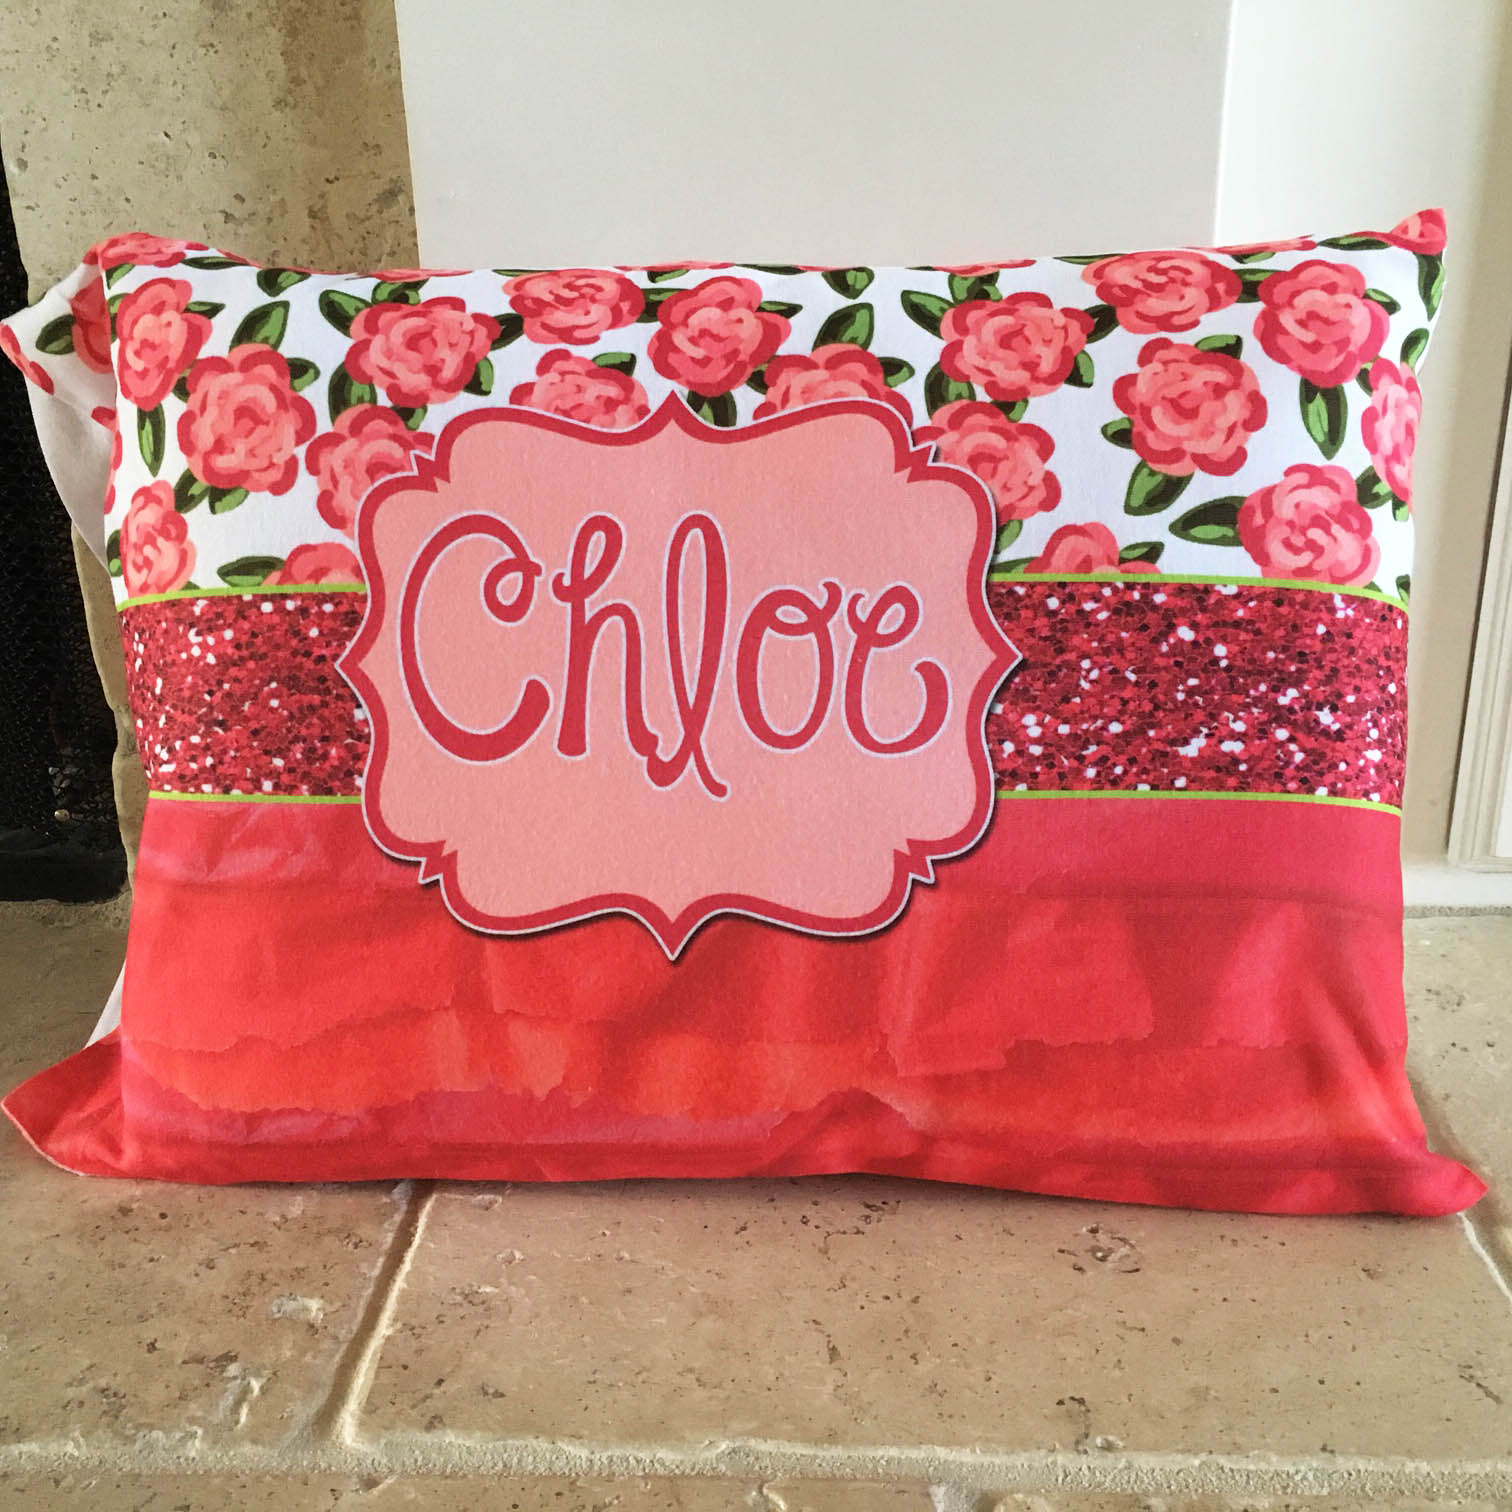 Personalized Travel Pillowcase made with sublimation printing